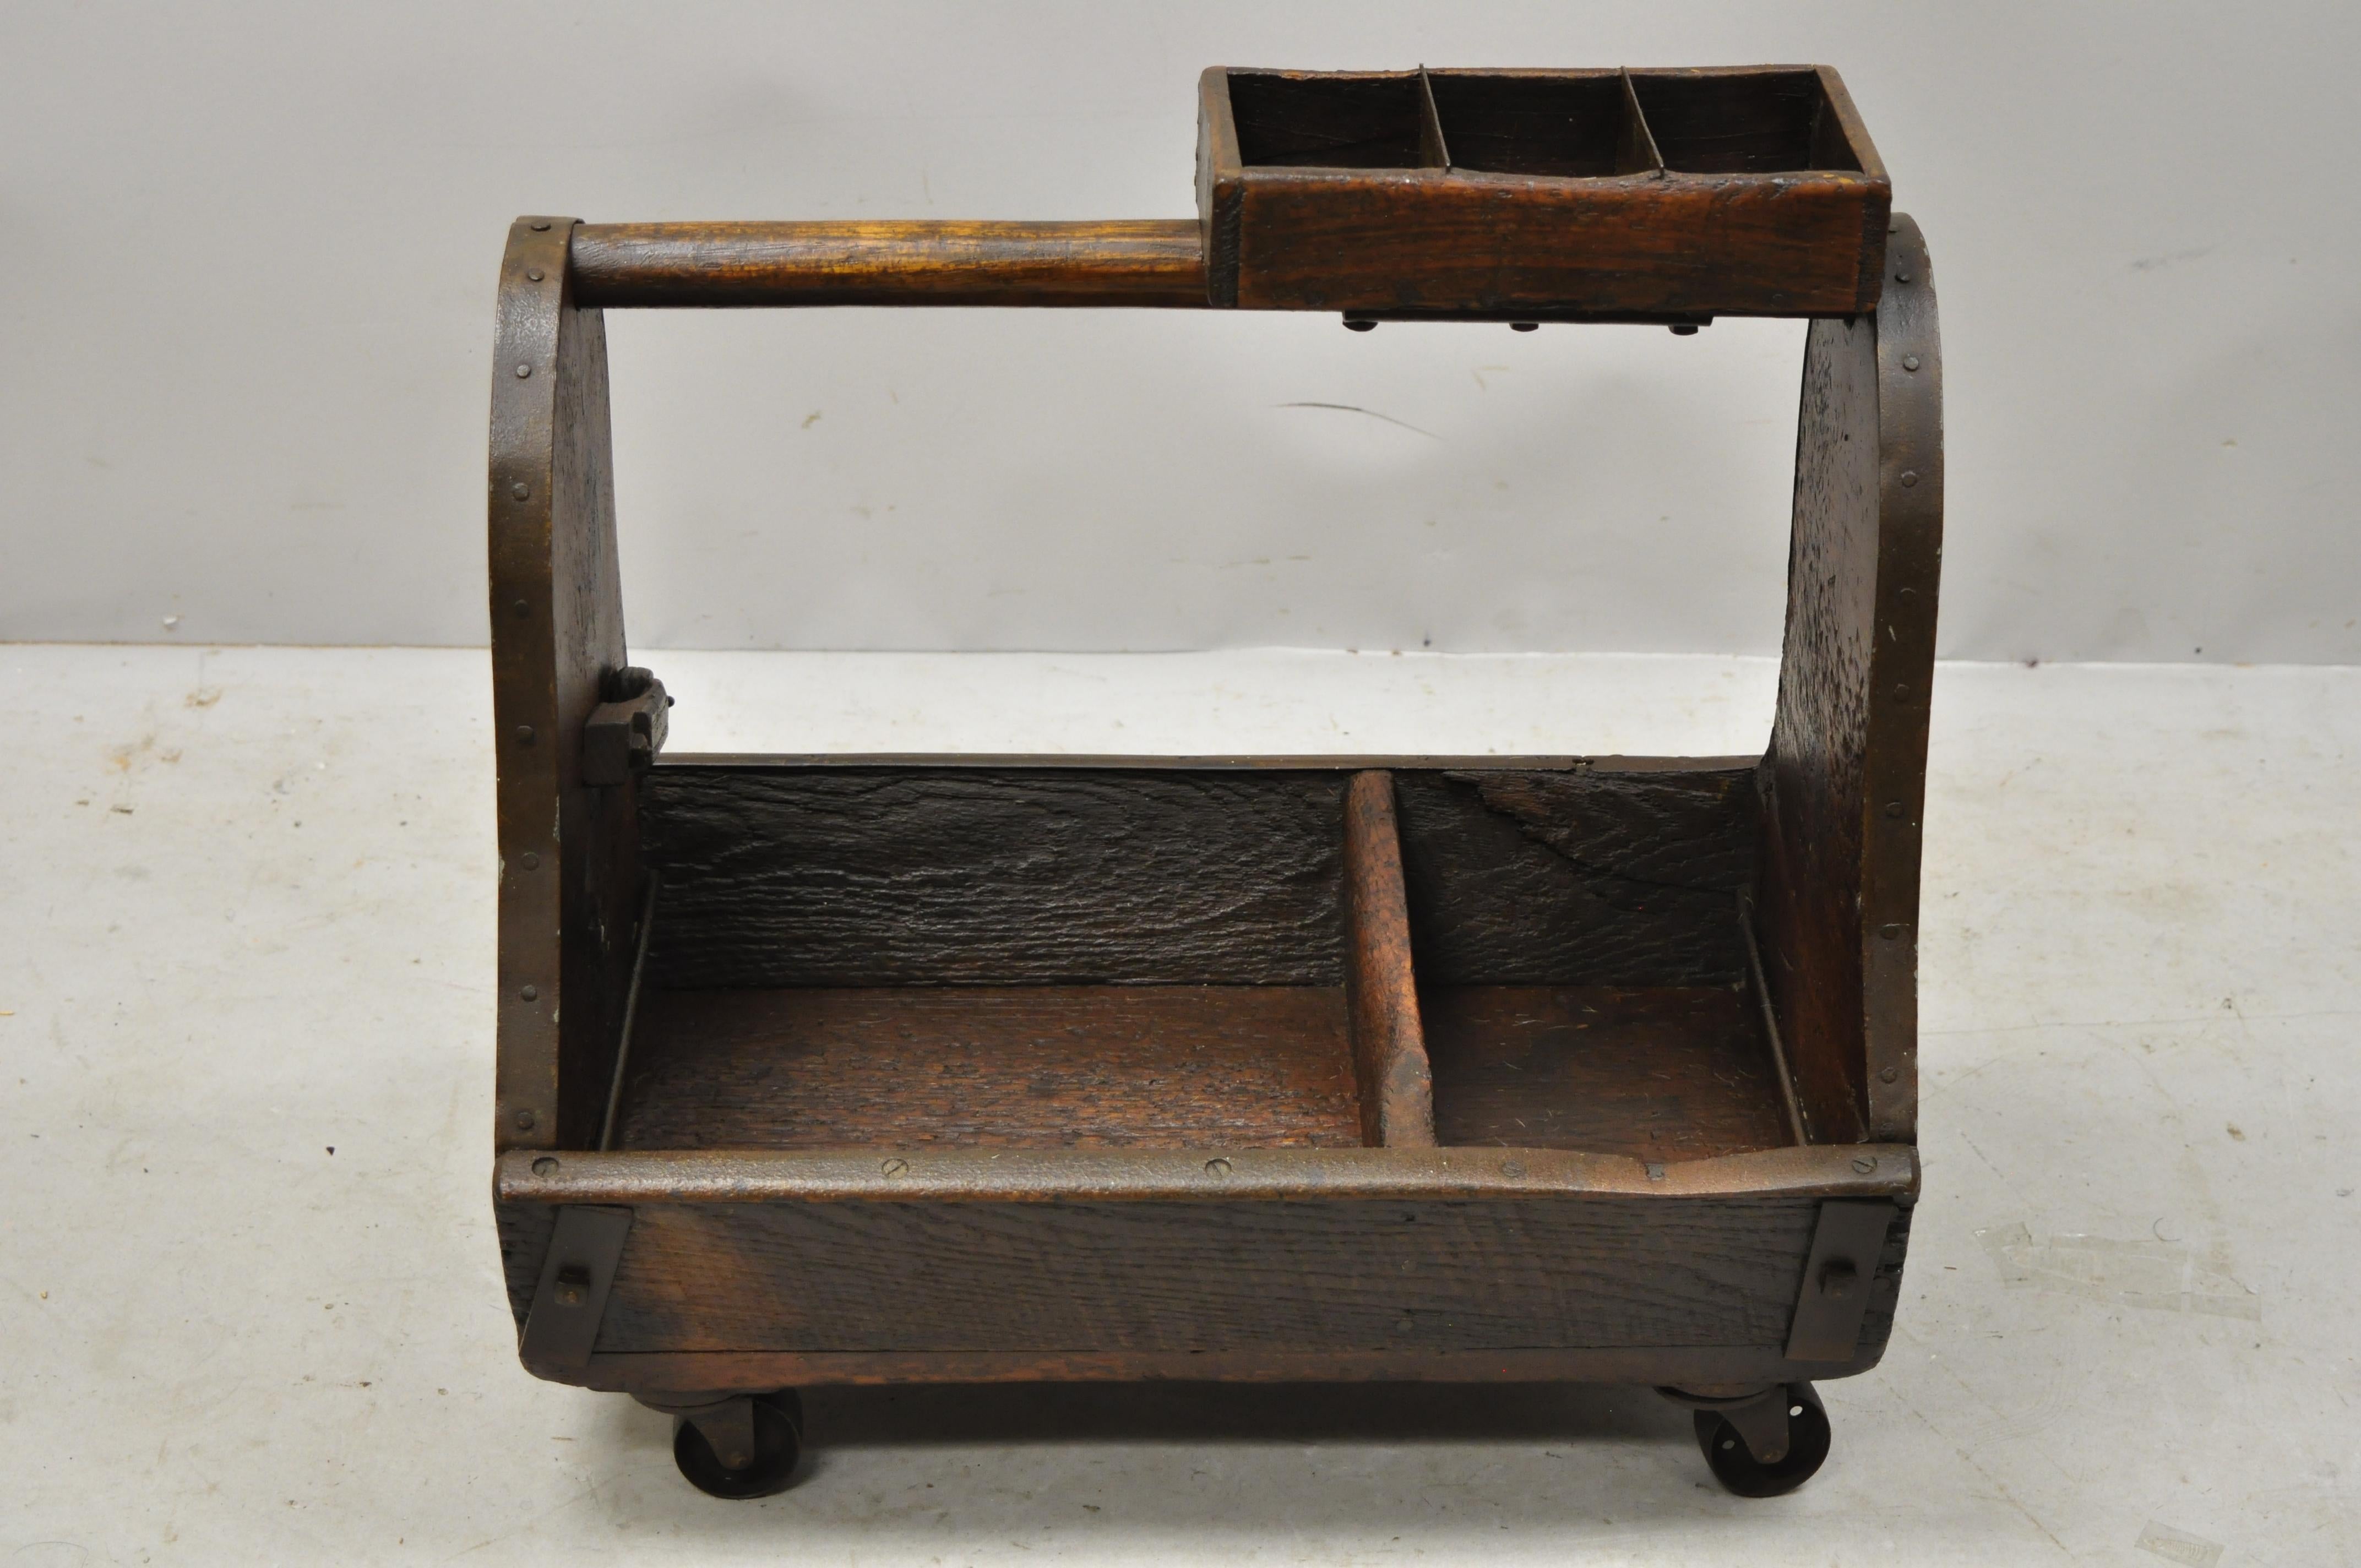 Antique American Primitive wood and iron carpenters cobblers tool box work caddy on wheels. Item features remarkable authentic patina, cast iron rolling wheels, multiple compartments, solid wood construction, beautiful wood grain, very nice antique